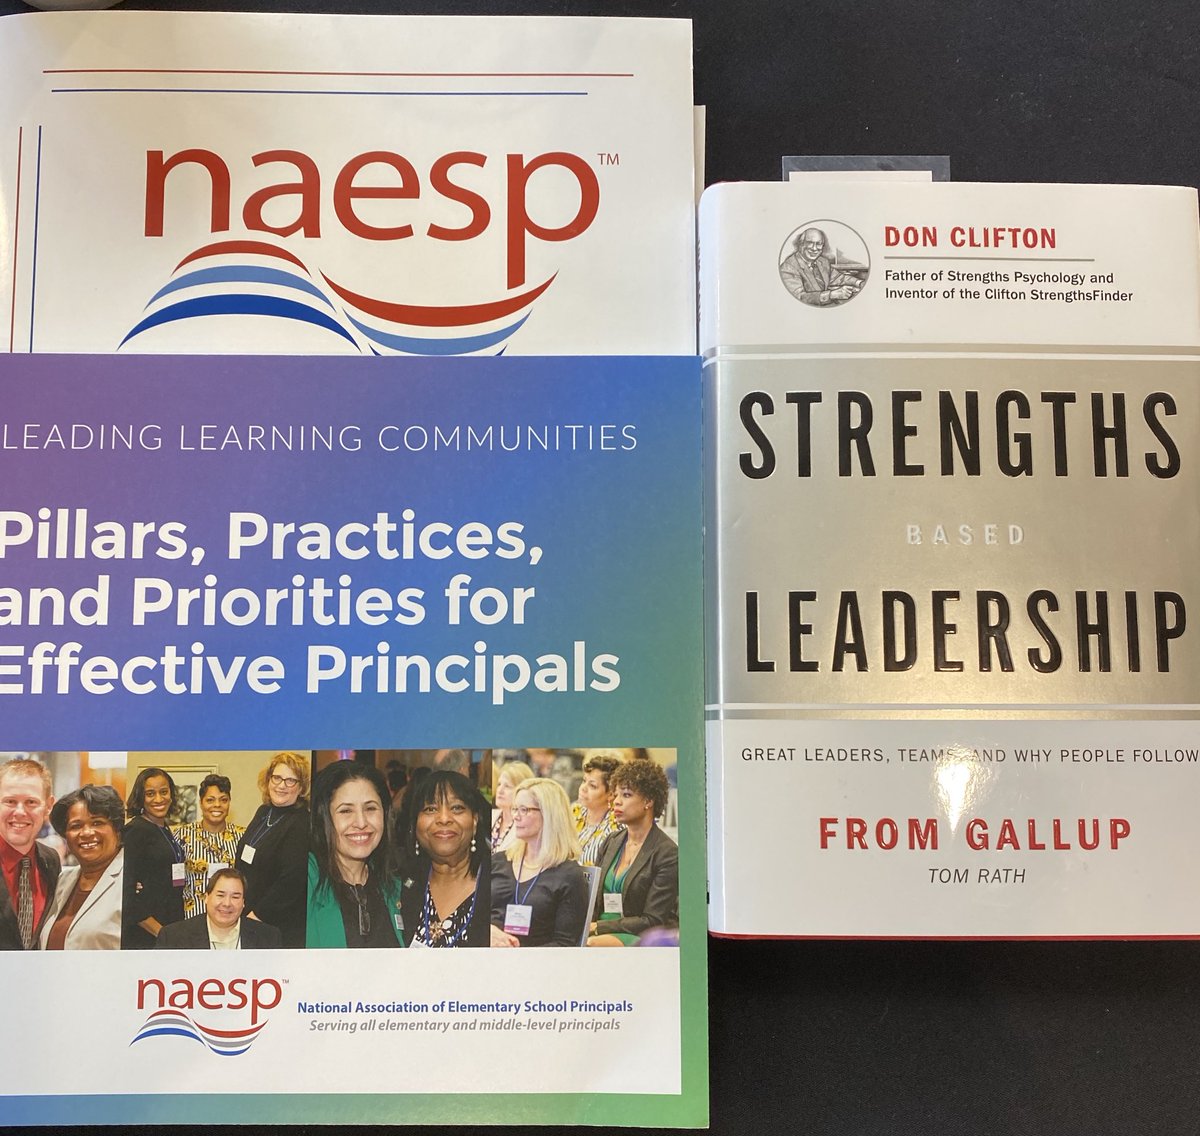 Thank you to ⁦@NAESP⁩ and ⁦@Maespmd⁩ for bringing the National Mentor Training & Certification program to MD! #NAESPLLC #PillarsAndPractices